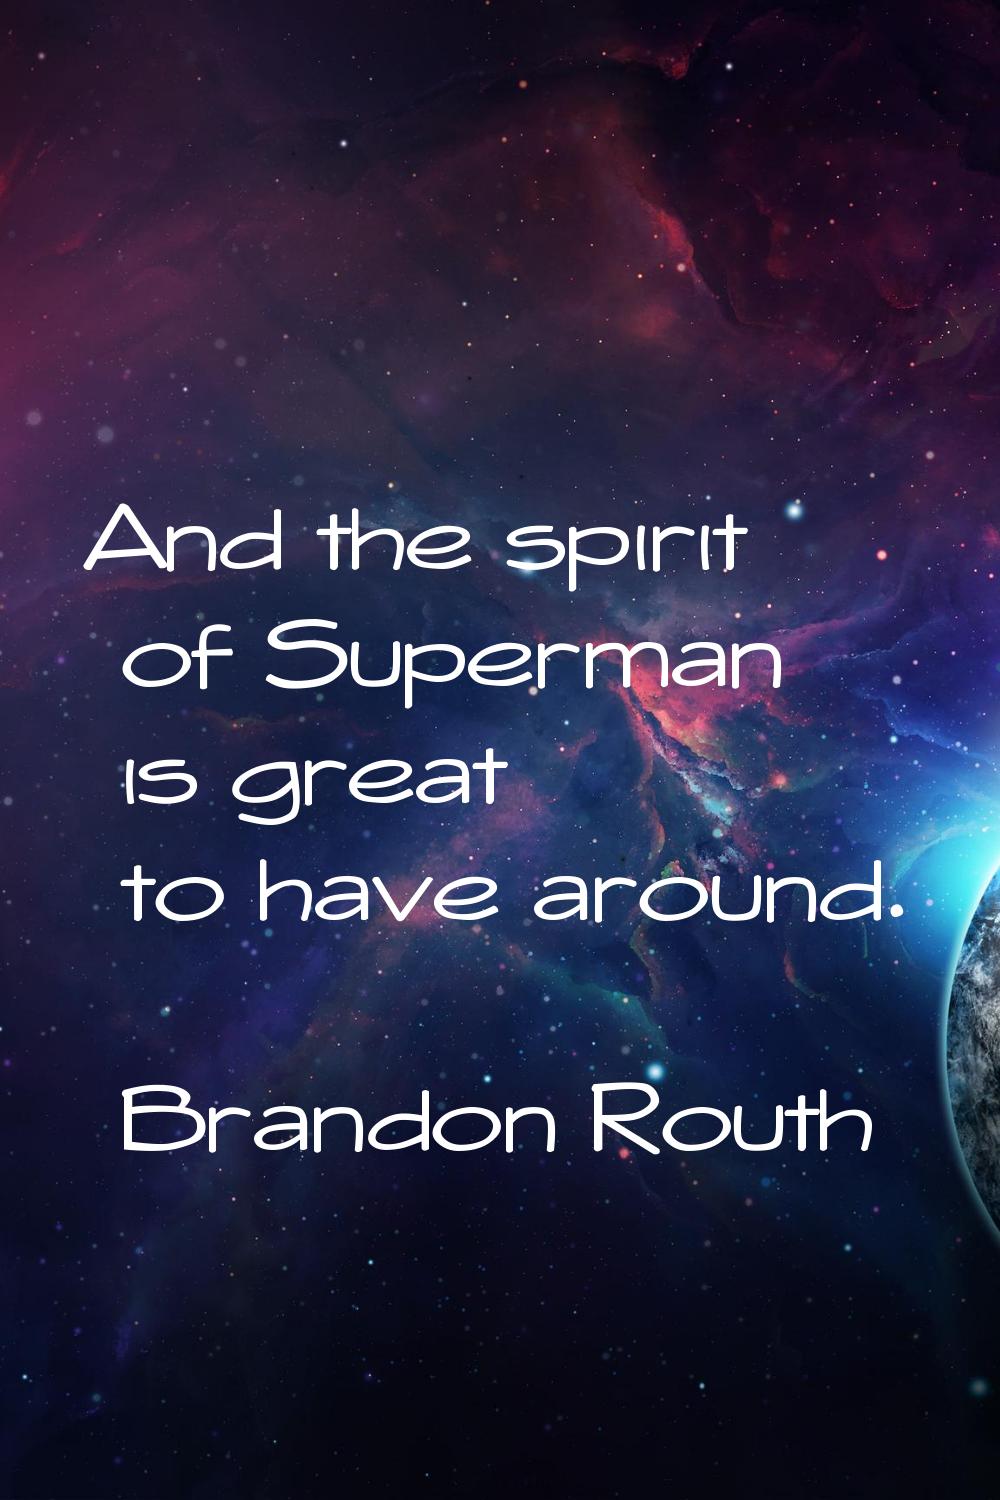 And the spirit of Superman is great to have around.